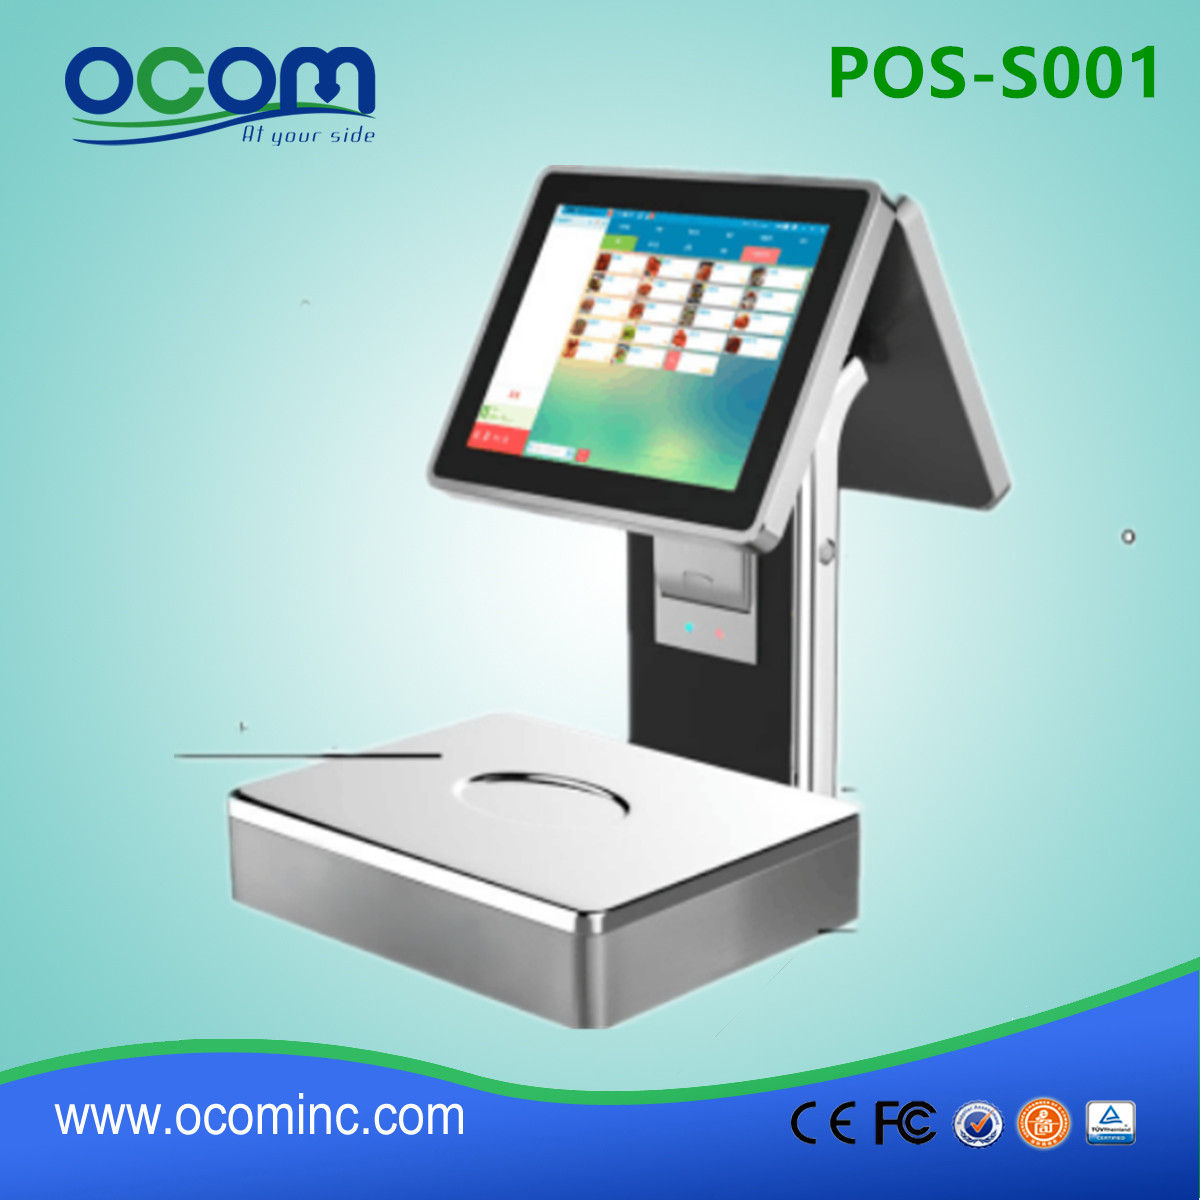 POS-S001-New model all in one touch screen POS Scale with thermal printer